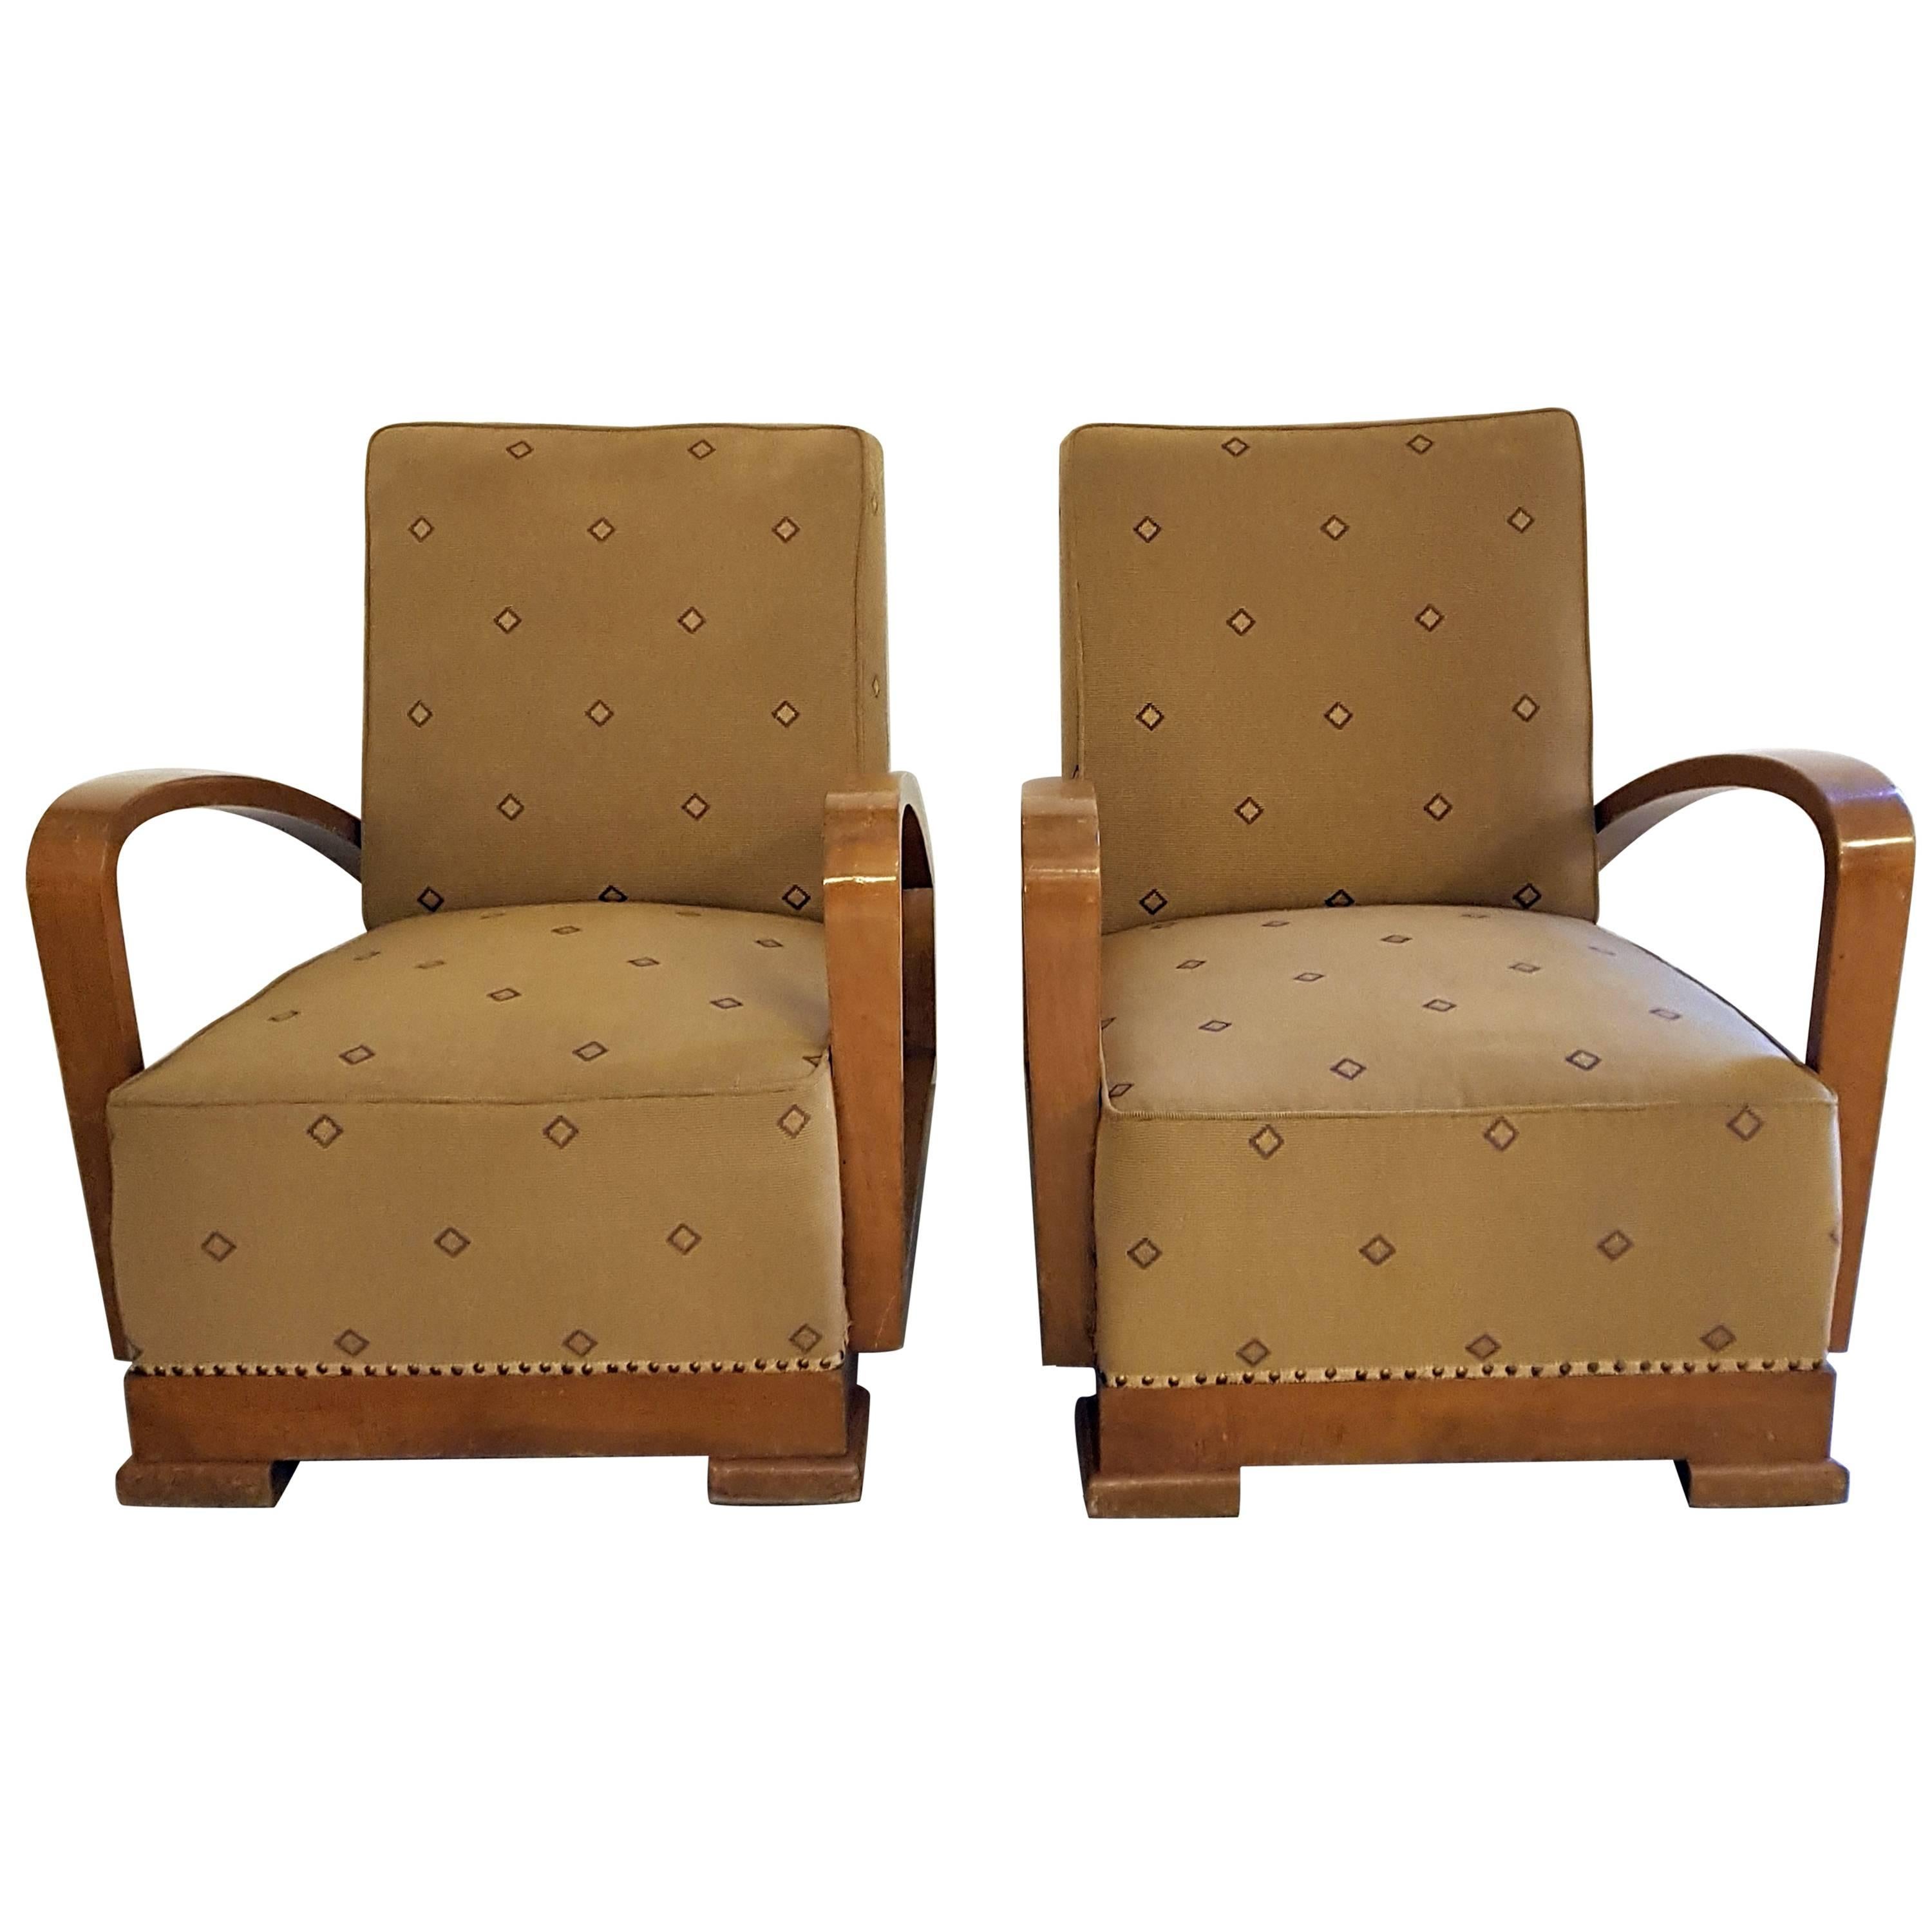 Pair of Fine Crafted Art Deco Armchairs in Nut Wood and Fabric Upholstery For Sale